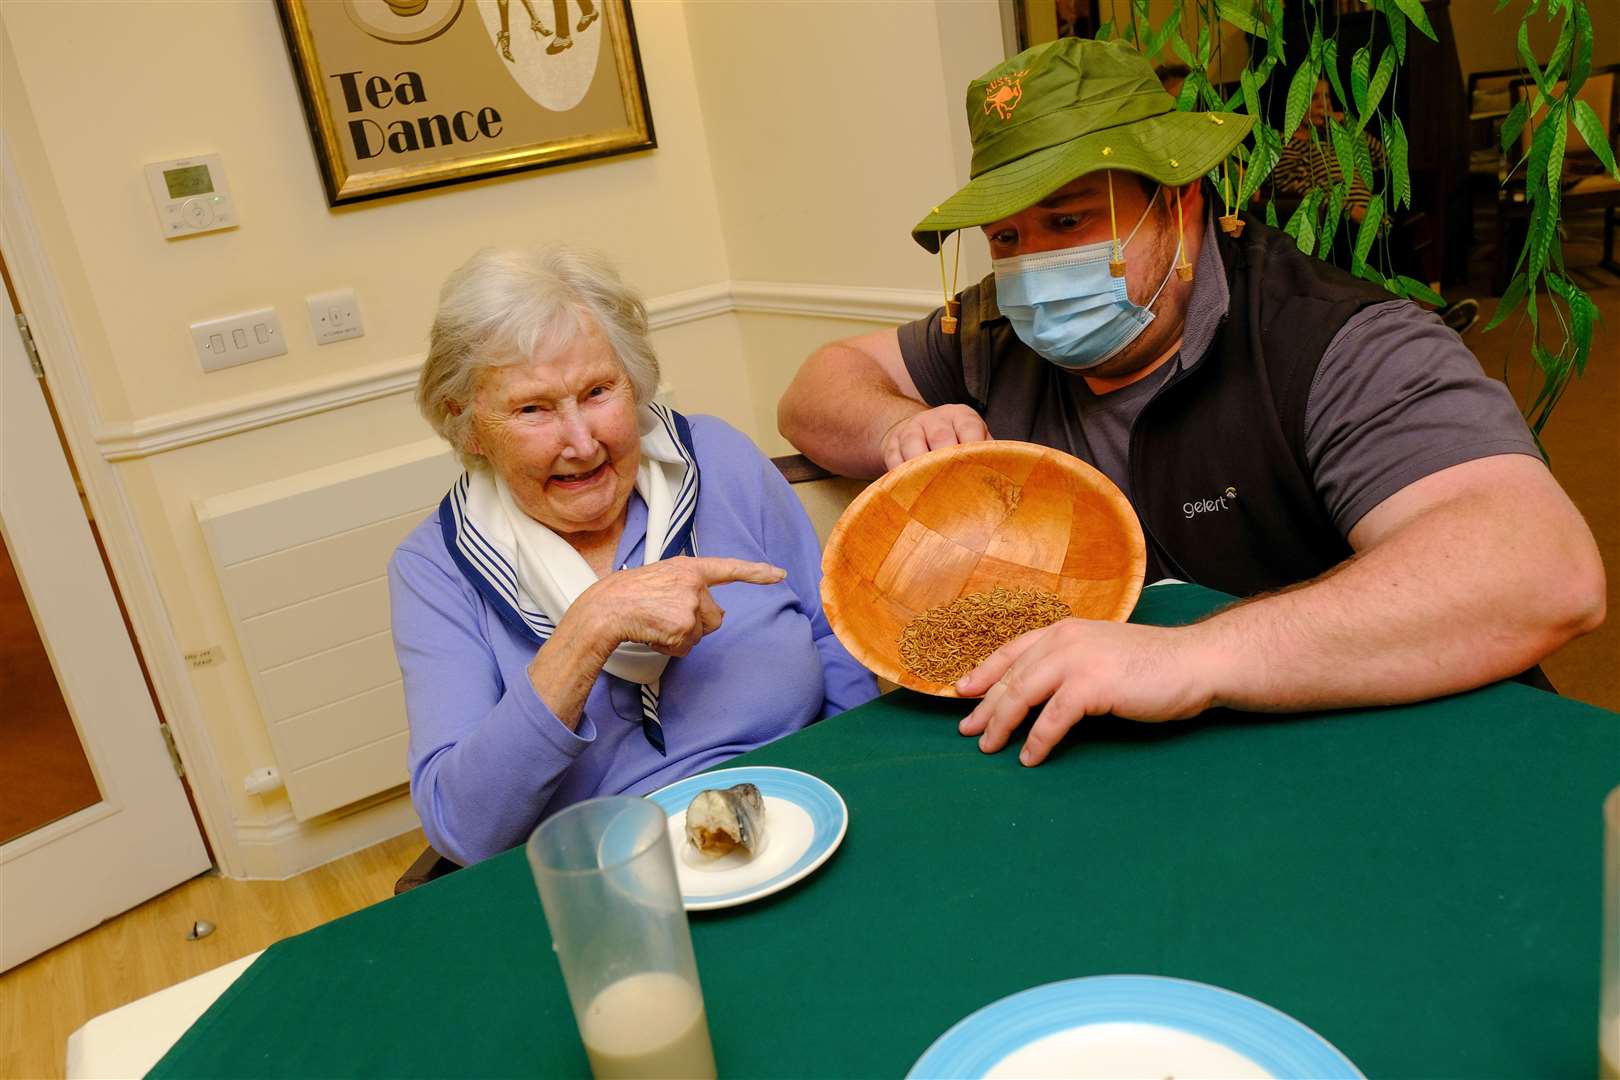 Doreen Barber, 96, with the care home’s lifestyle lead Dan Bailey (Care UK/PA)